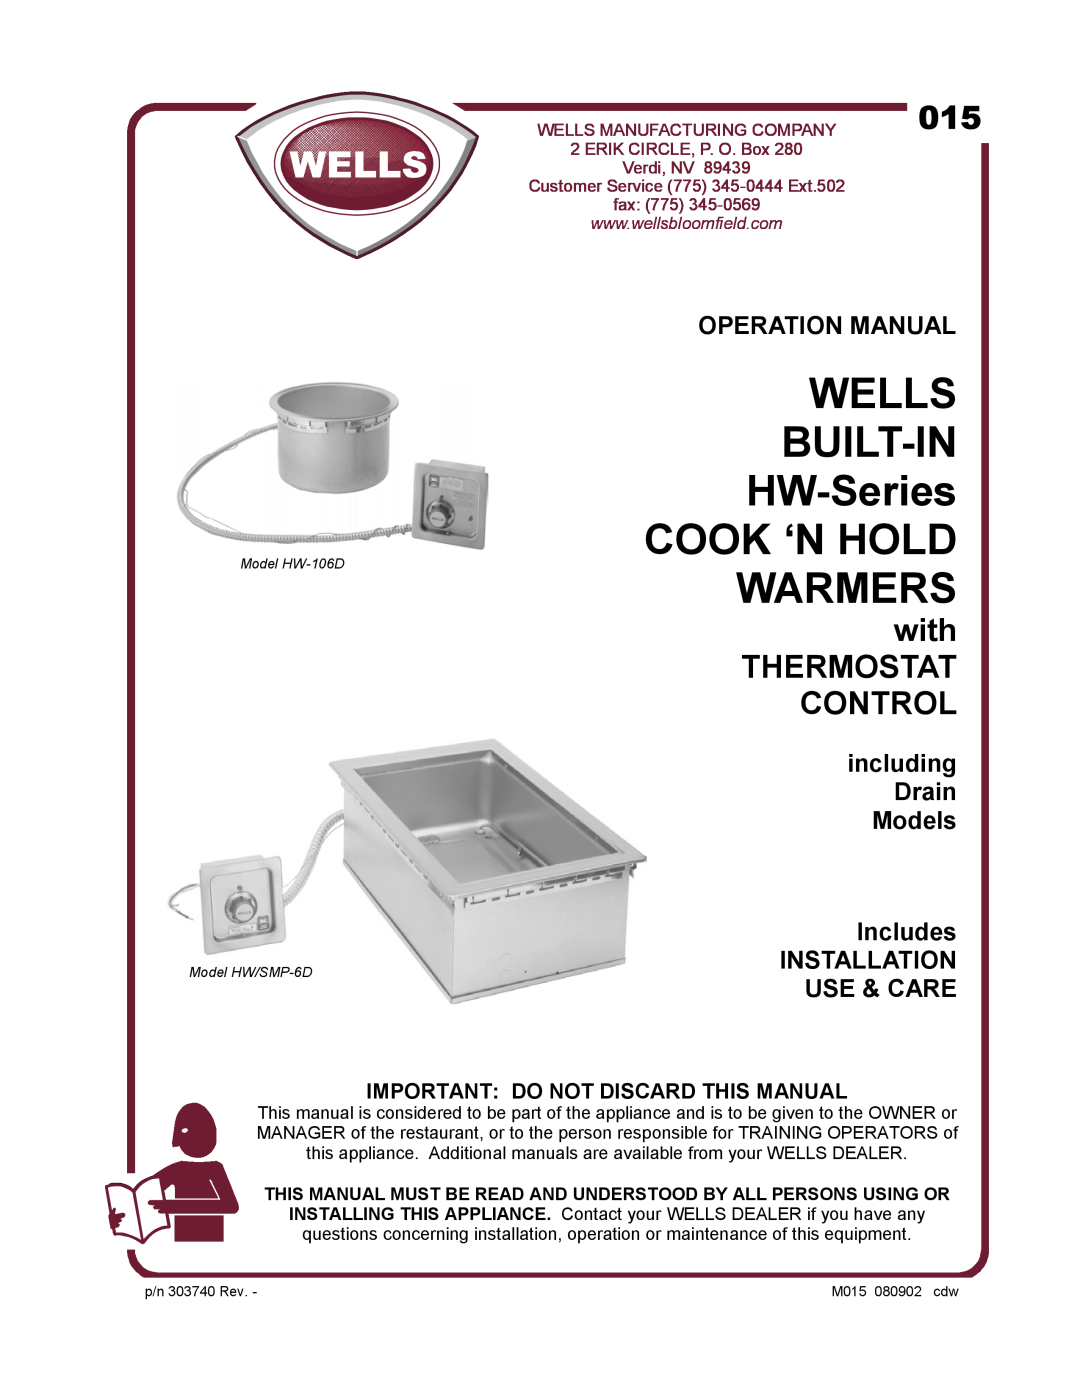 Wells HW/SMP-6D operation manual with THERMOSTAT CONTROL, including Drain Models Includes INSTALLATION USE & CARE, Ext.502 